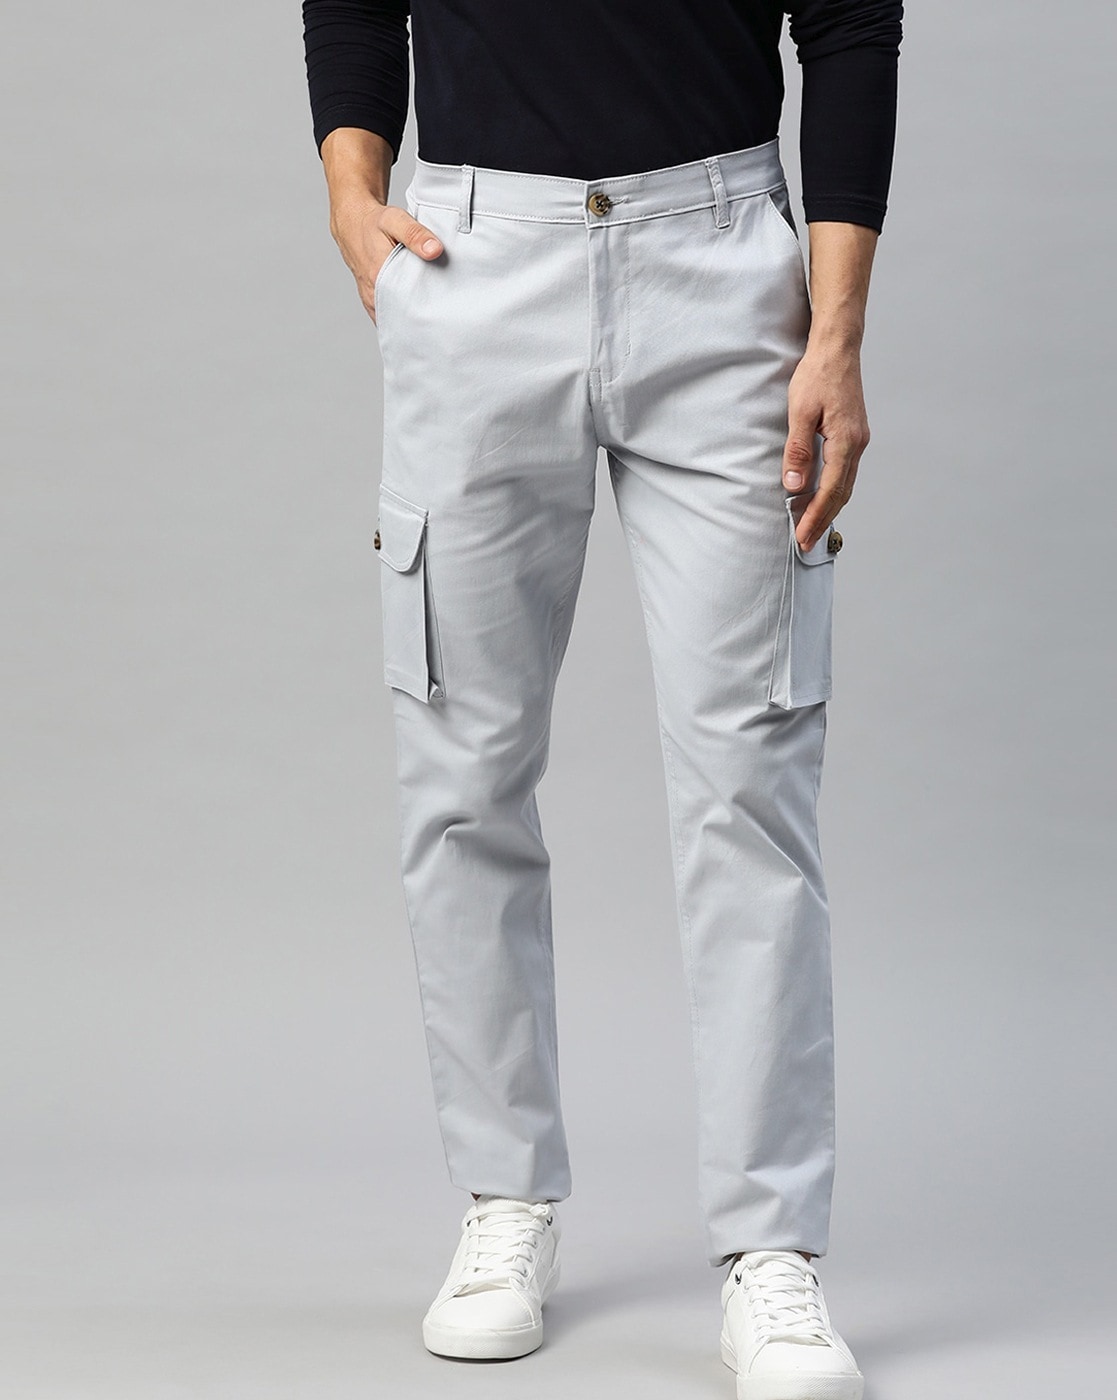 Blended Chino Cargo Pants for Men and Women